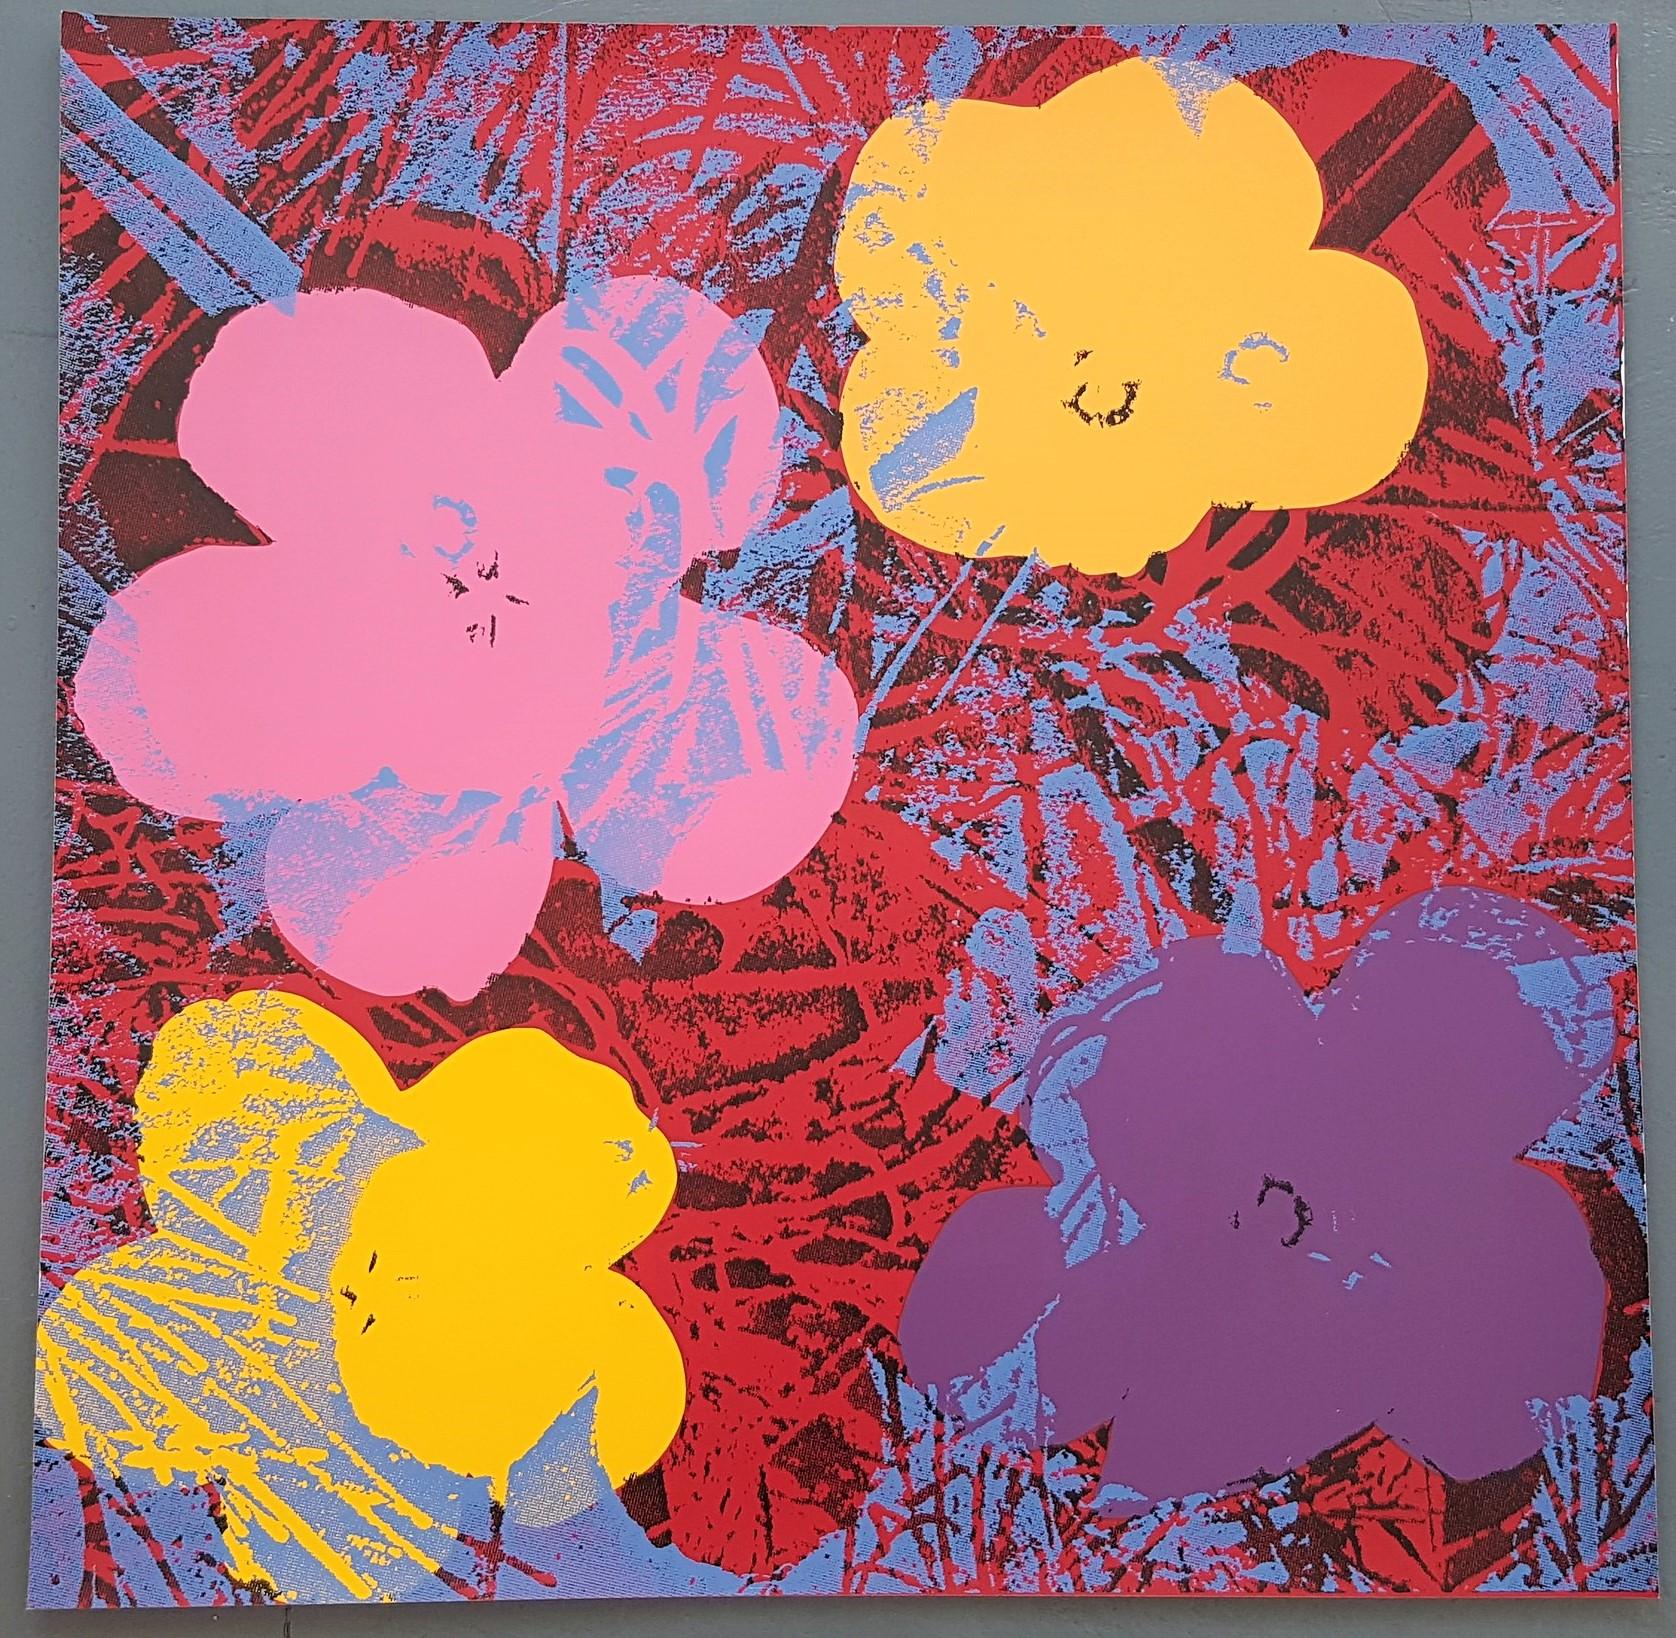 Flowers (Pink, Yellow, Purple Hues, Pop Art) (~70% OFF LIST PRICE, LIMITED TIME) - Print by Jurgen Kuhl 